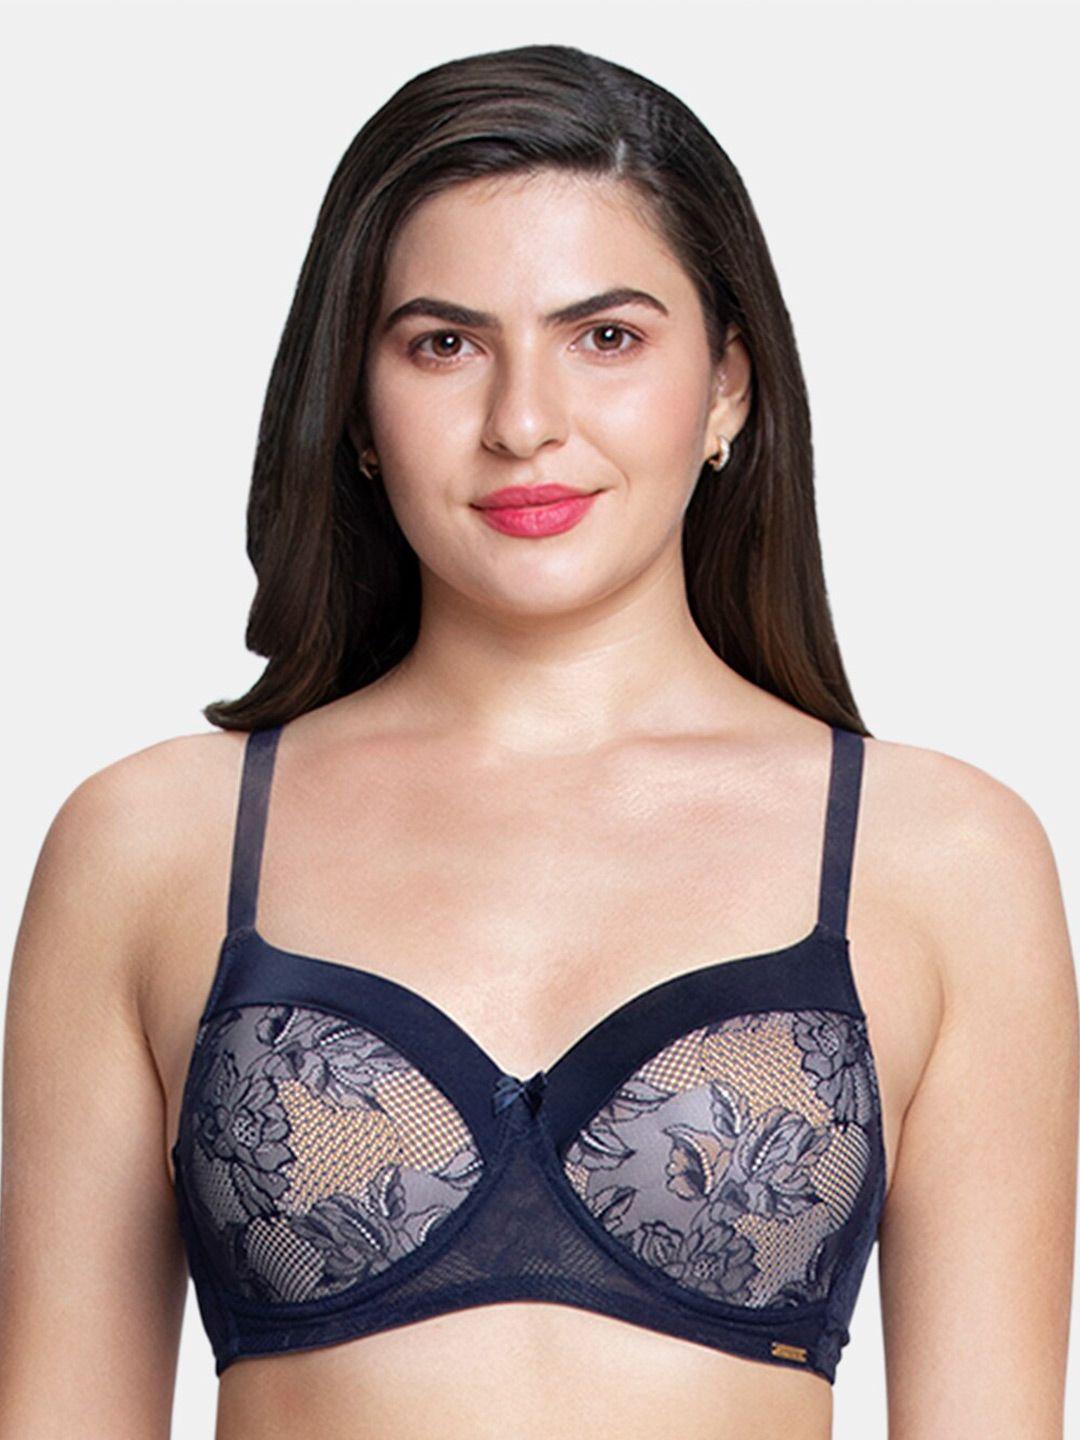 blue satin touch lace padded non-wired full coverage lace bra - bra87901